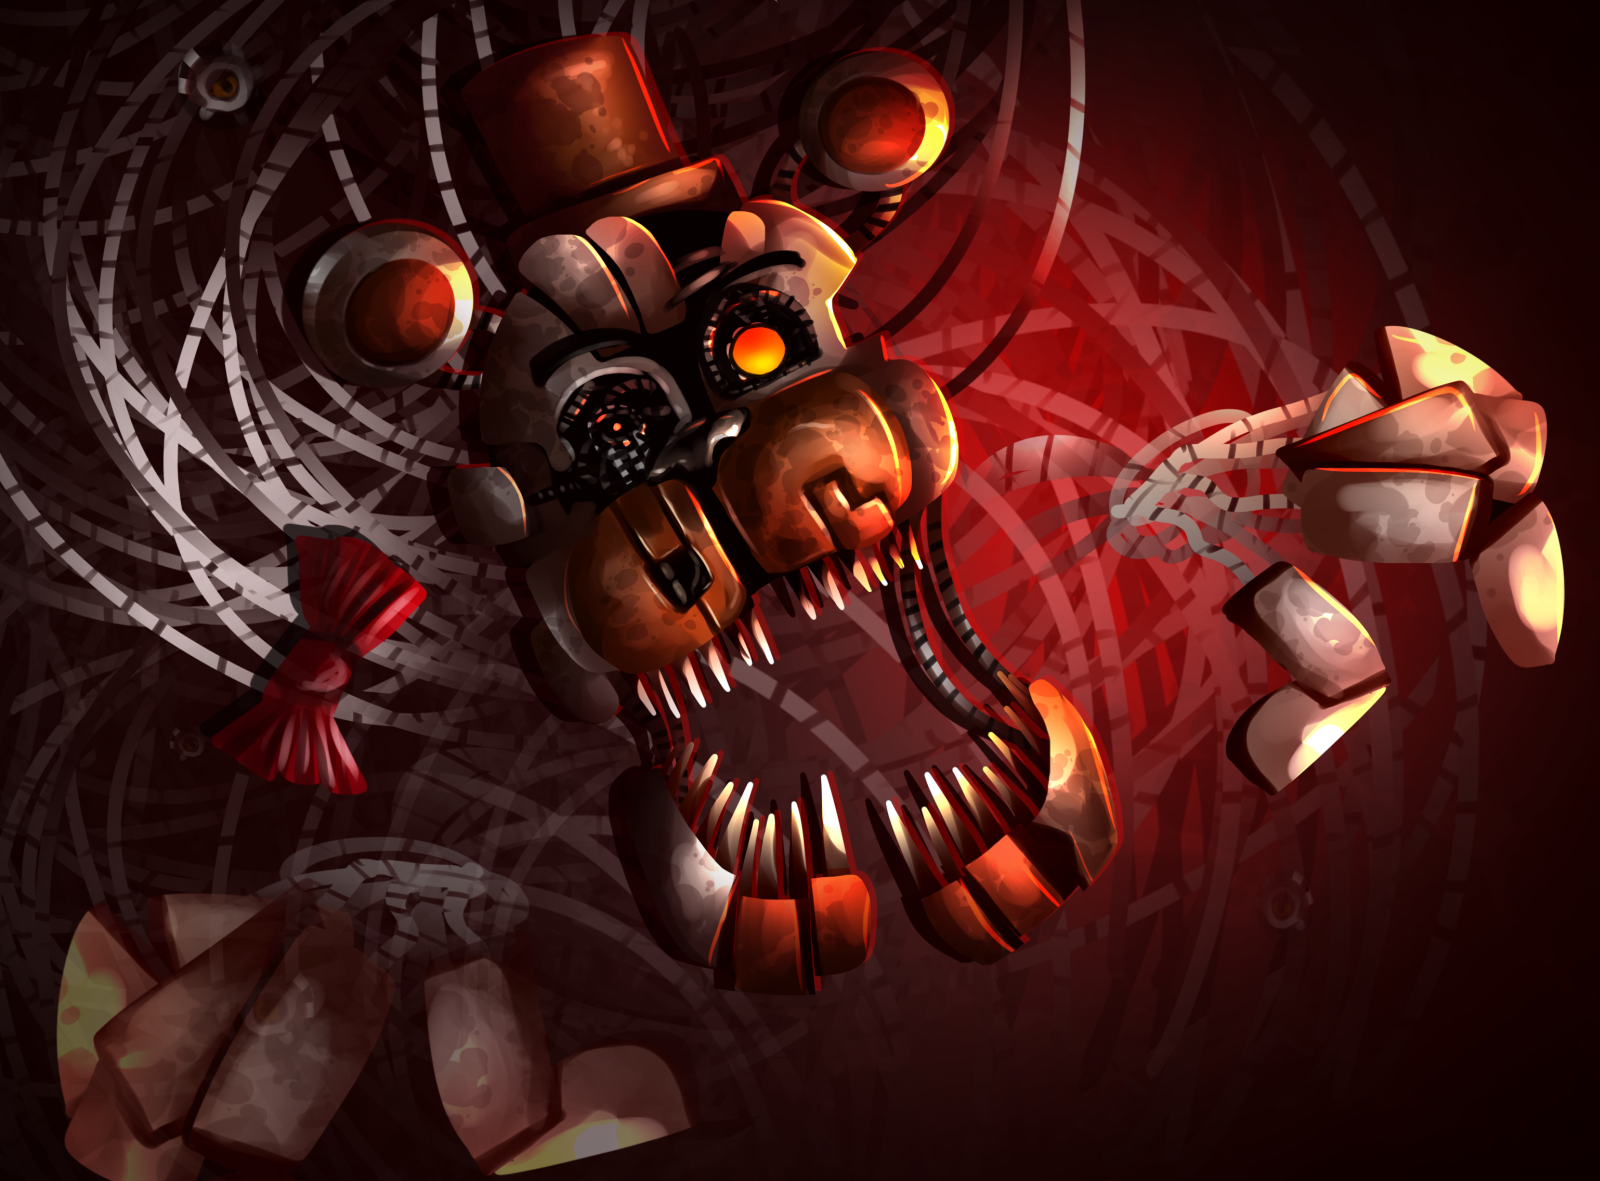 Molten Freddy by rocioam7 -Available for work - COMM Open on Dribbble